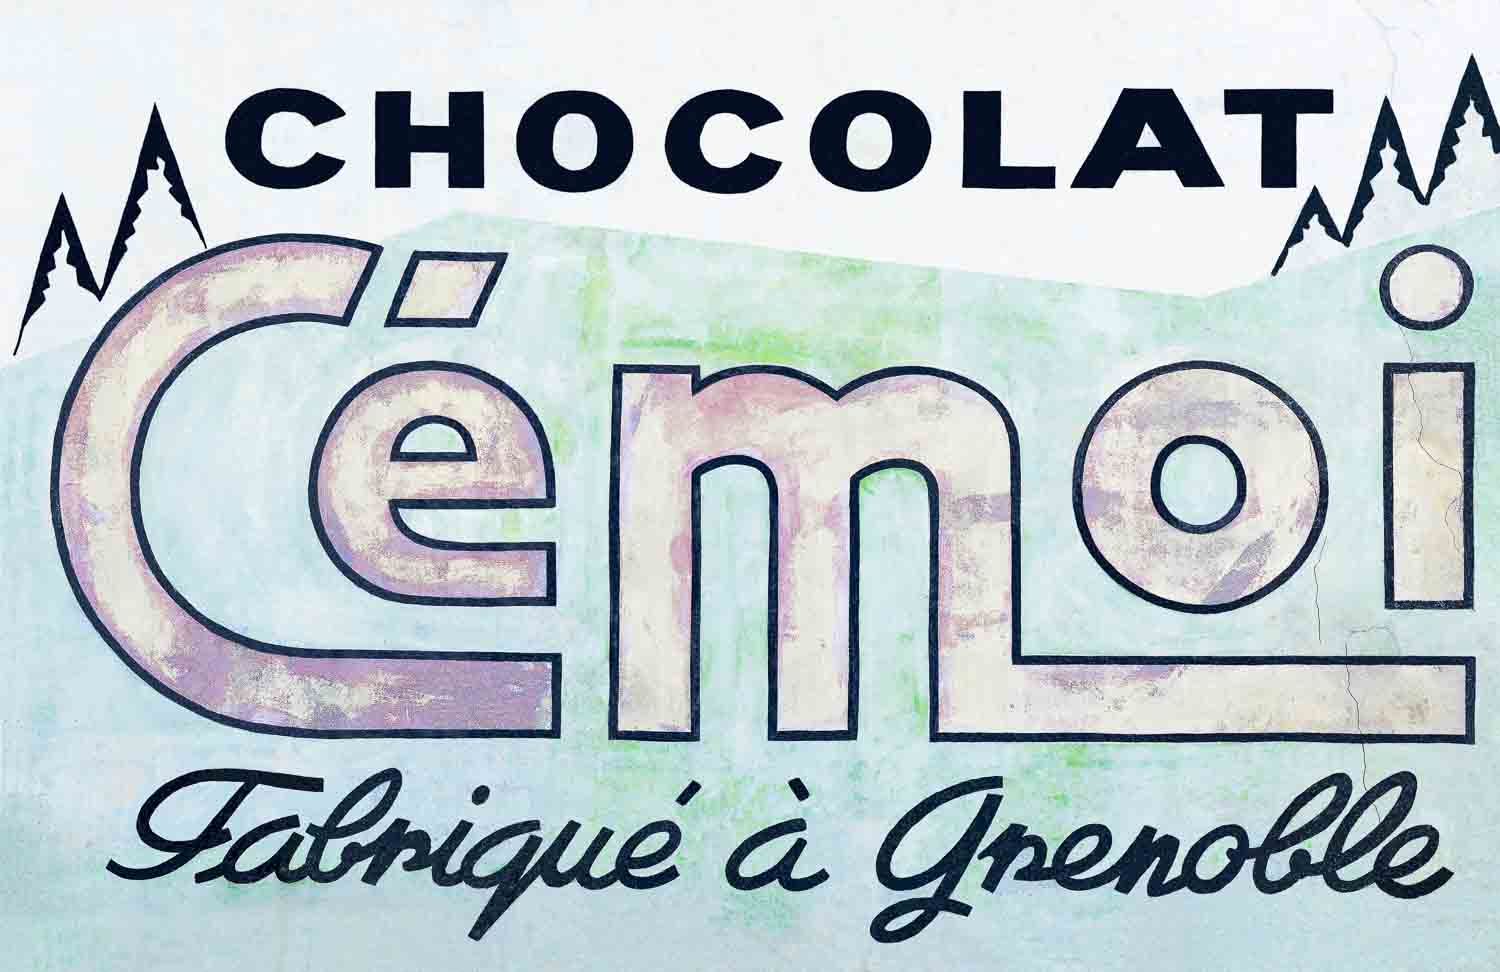 painted wall advertising CHOCOLAT CÉMOI